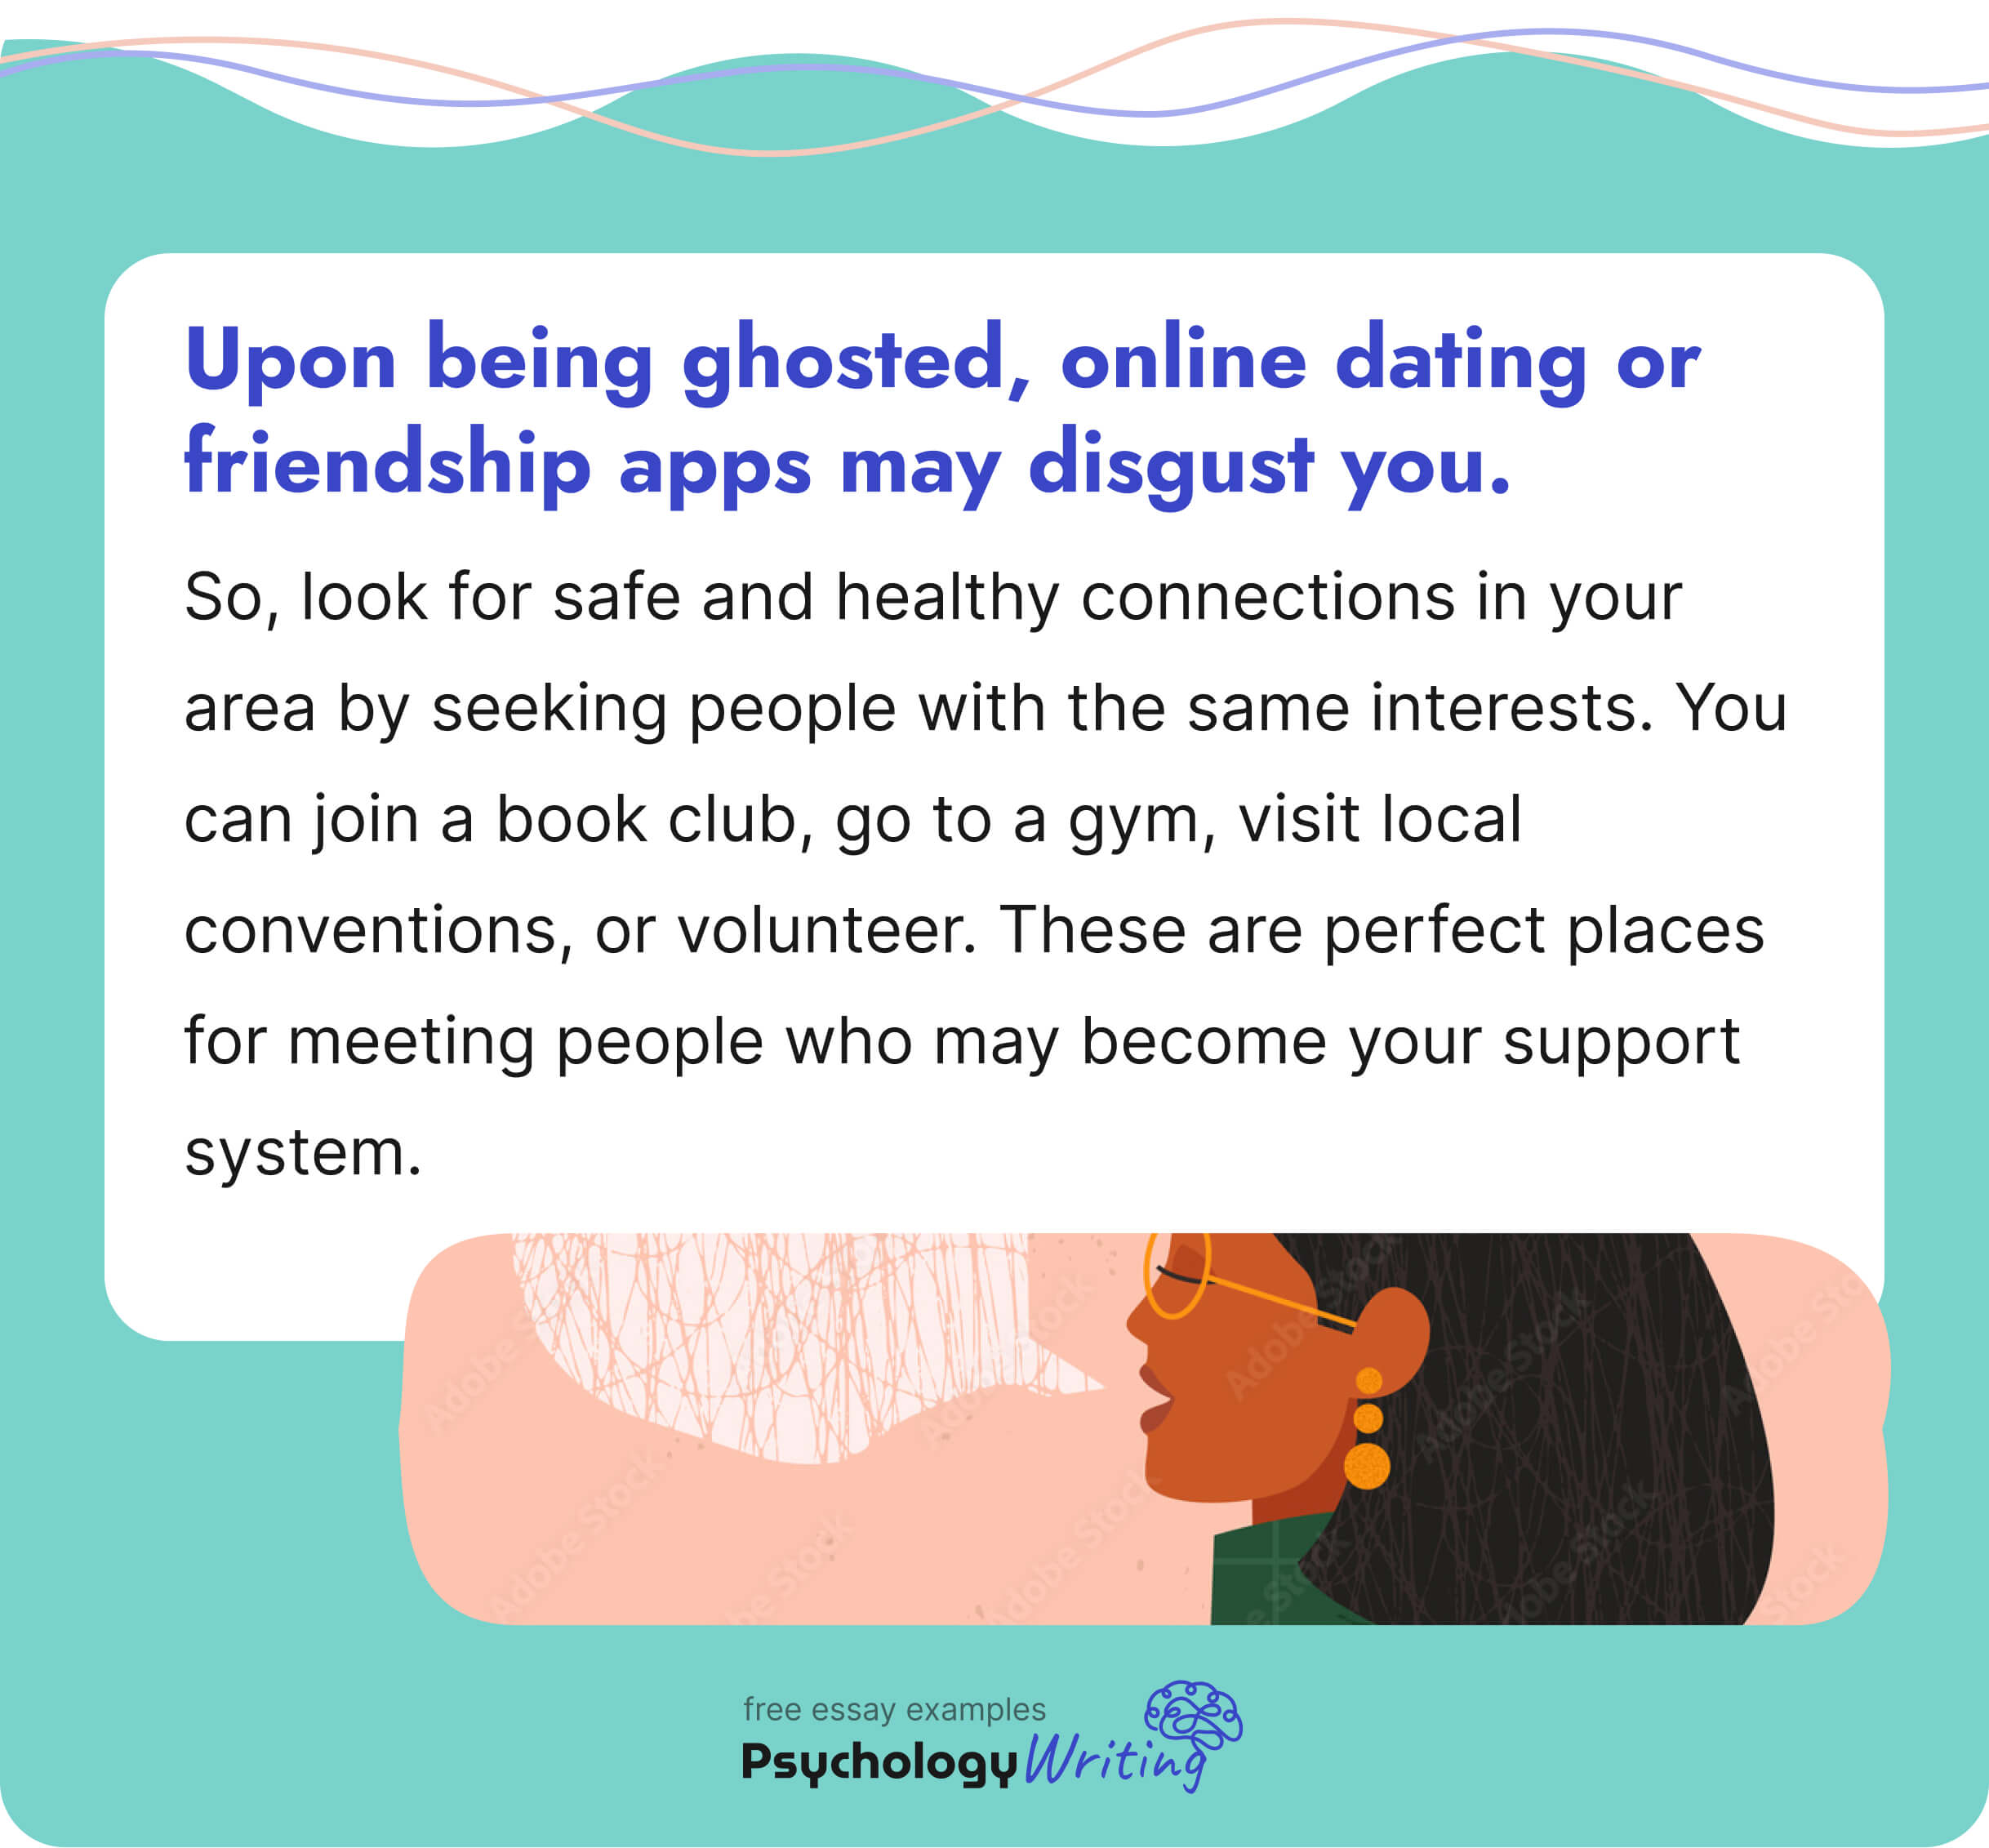 After being ghosted, online dating apps may not be for you.